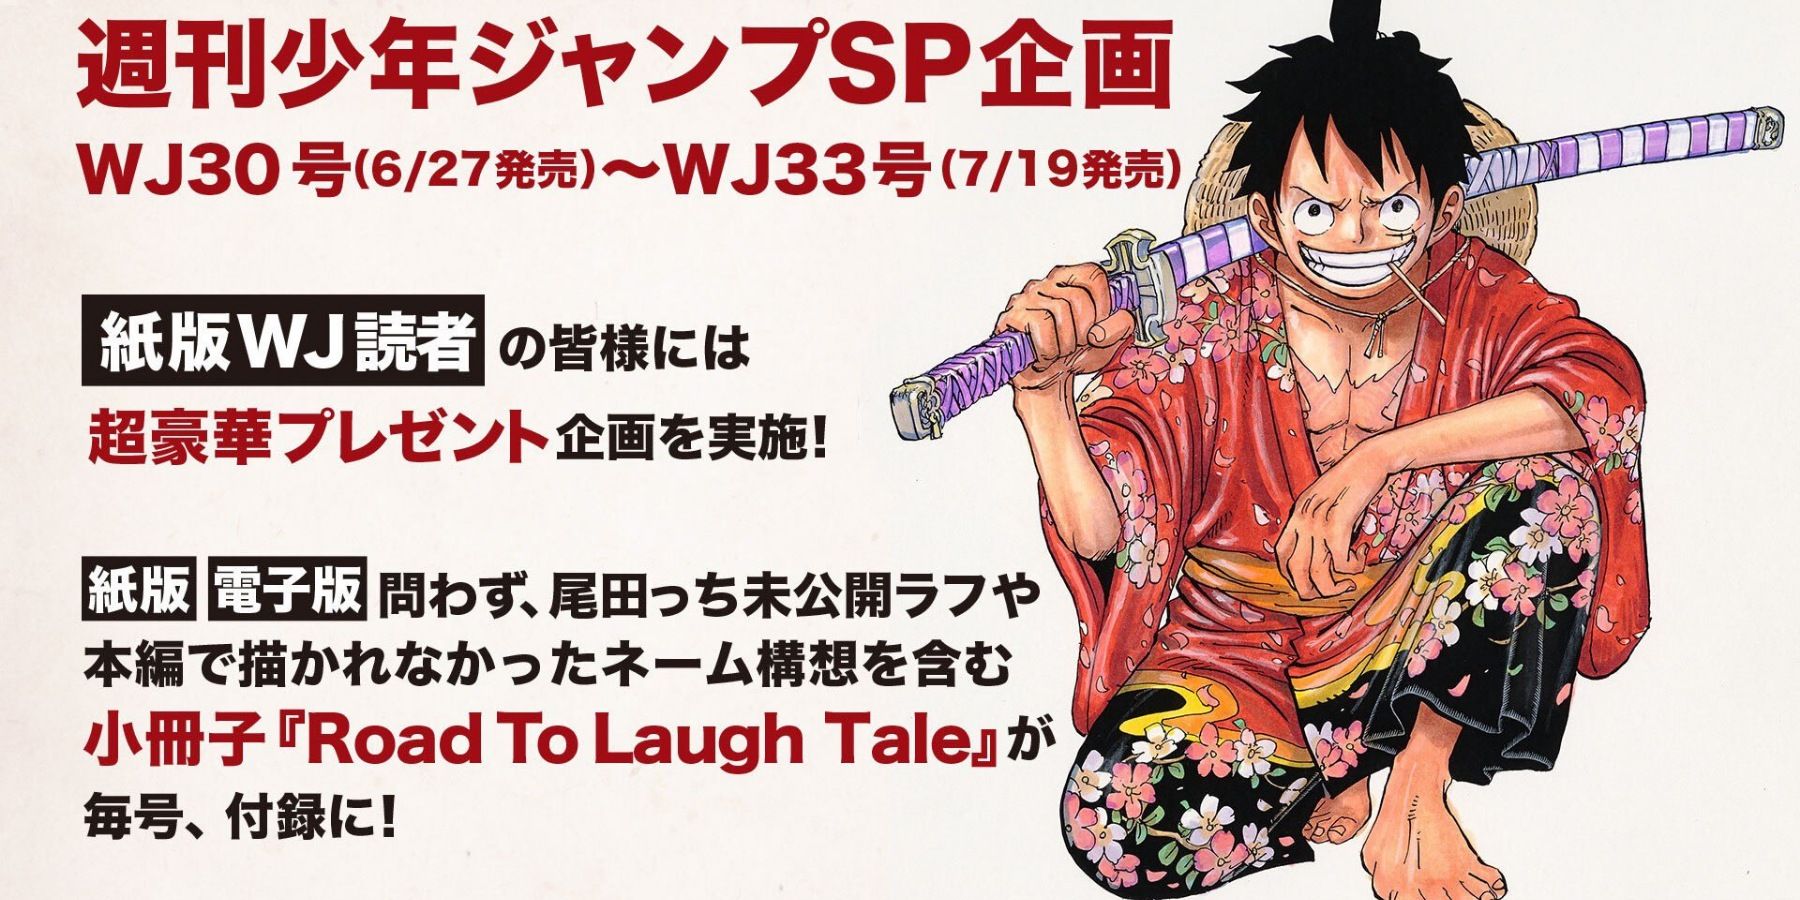 One Piece's Manga Ending Supposedly Revealed